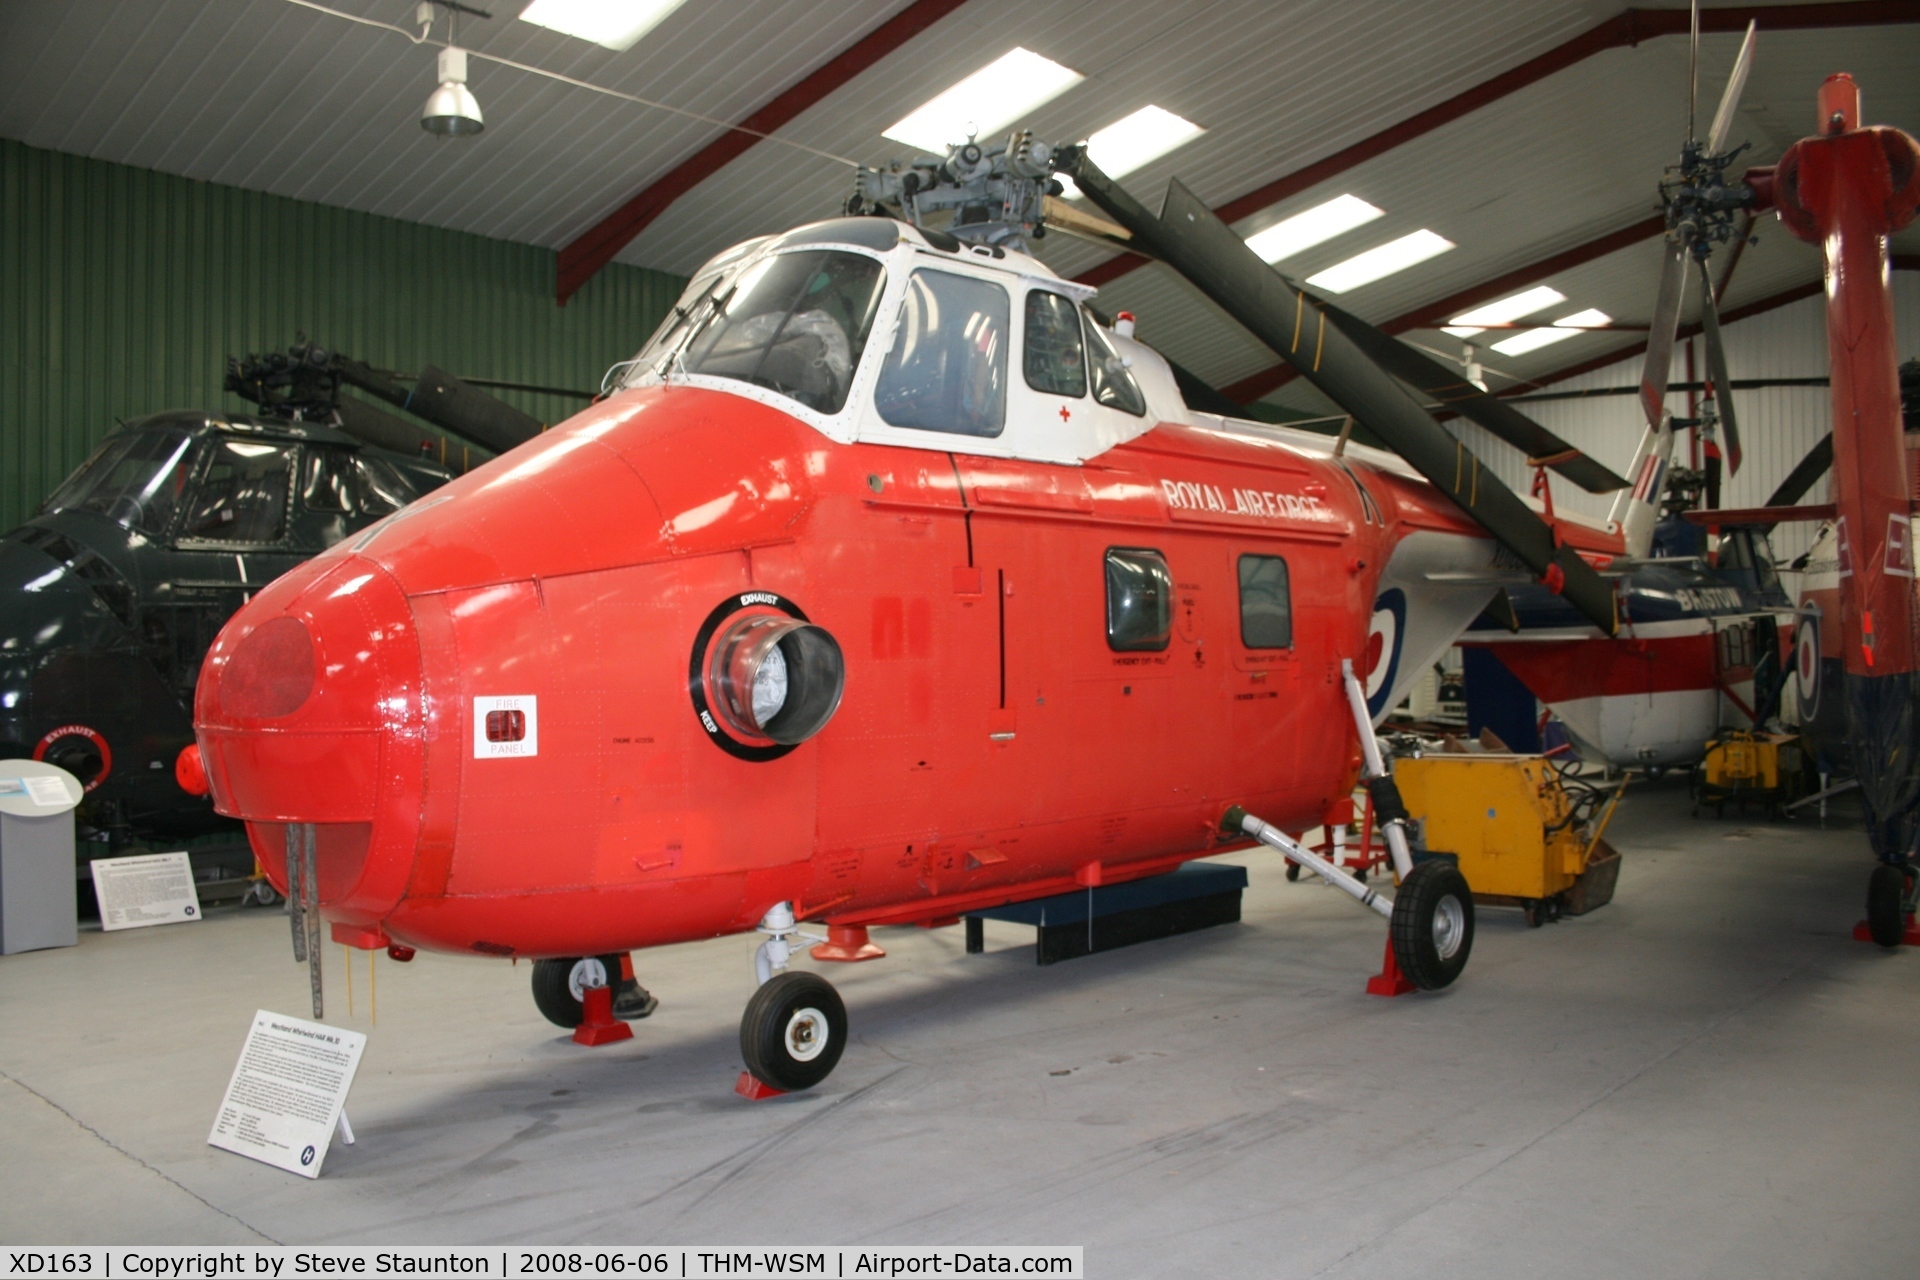 XD163, 1954 Westland Whirlwind HAR.10 C/N WA20, Taken at the Helicopter Museum (http://www.helicoptermuseum.co.uk/)